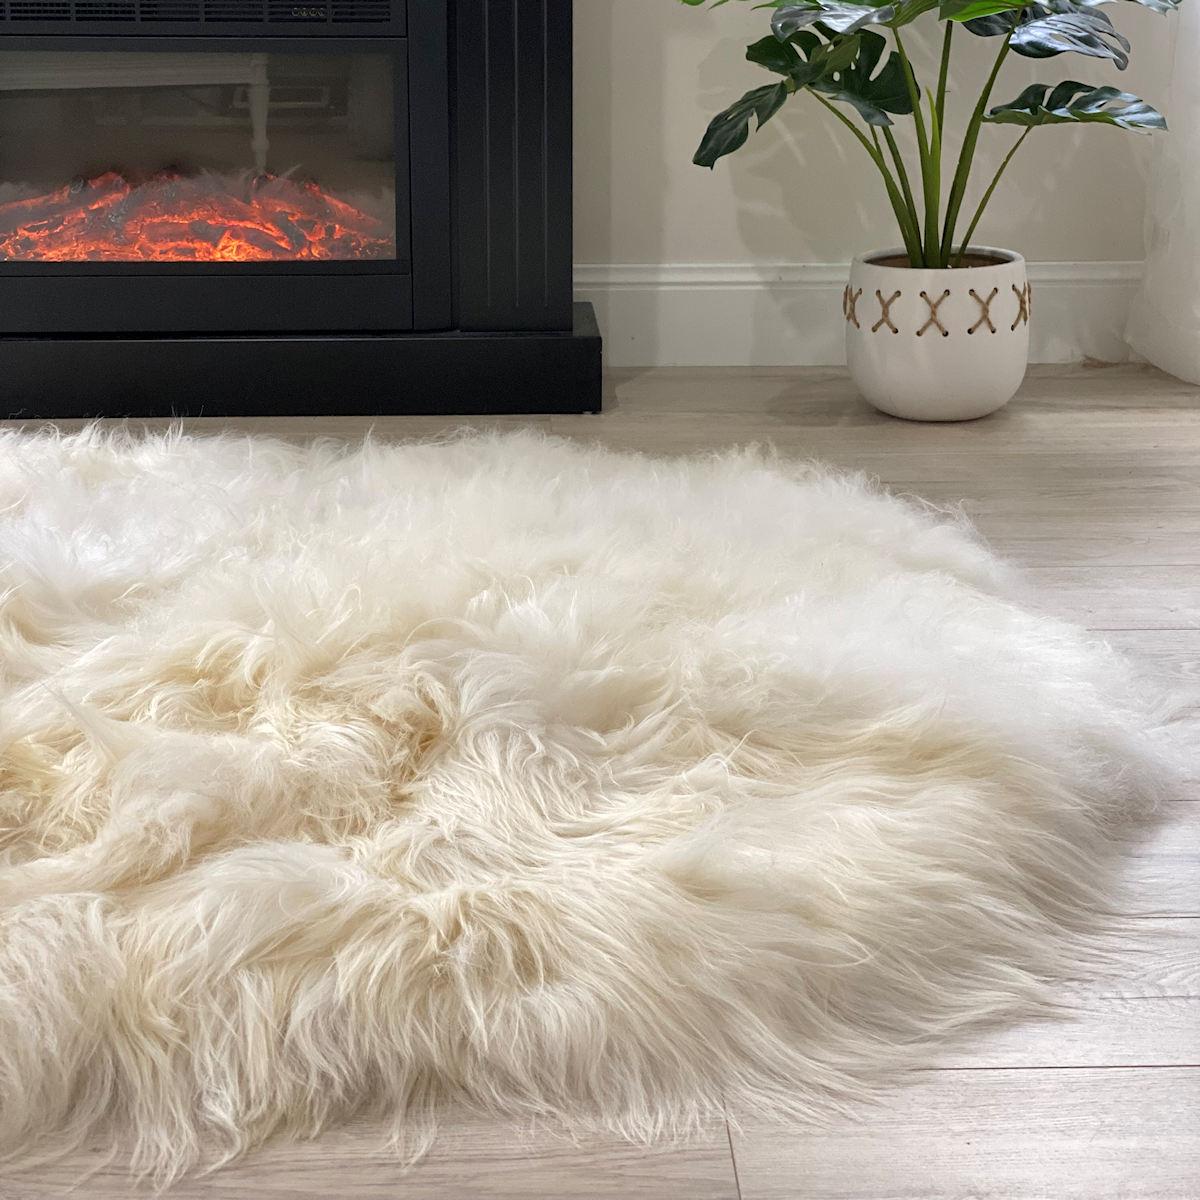 Enjoy the lush and cozy textures found in this oval shaggy rug, as your home is elevated with the natural luxury of genuine sheepskin. This Icelandic sheepskin rug will be that perfect accent to add charm and character to an interior whilst